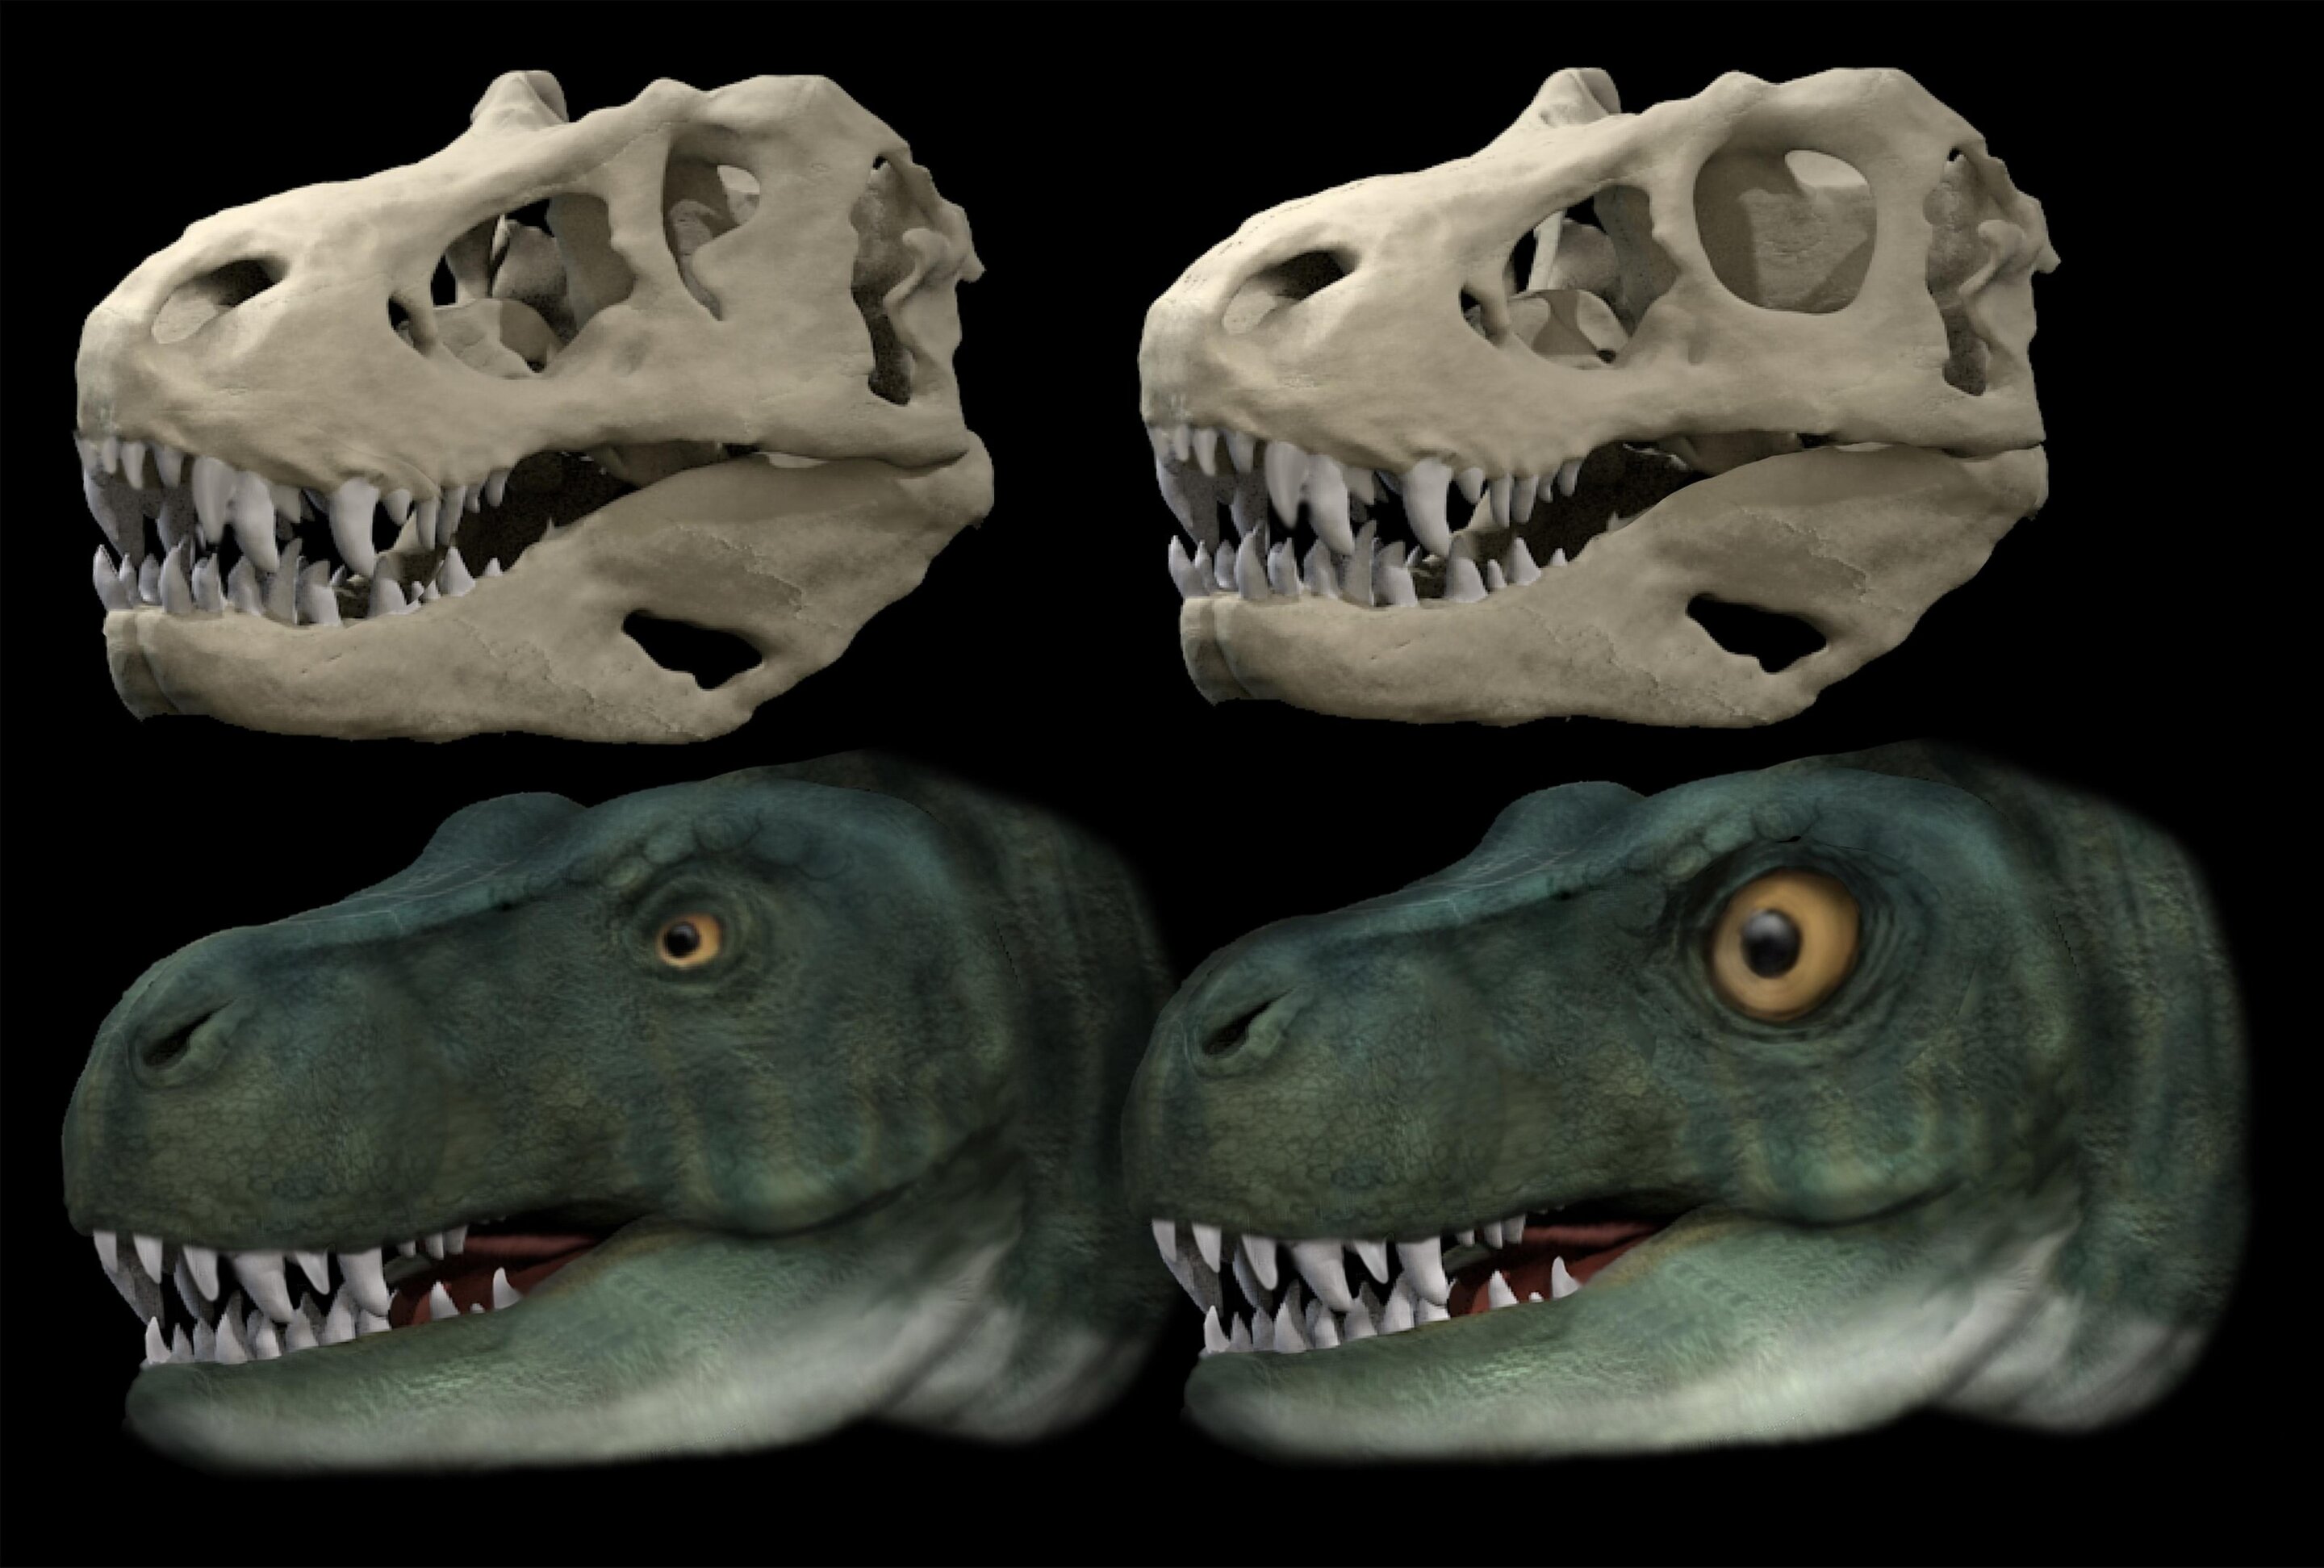 All the better to better eat you with – dinosaurs evolved different eye socket shapes to allow stronger bites